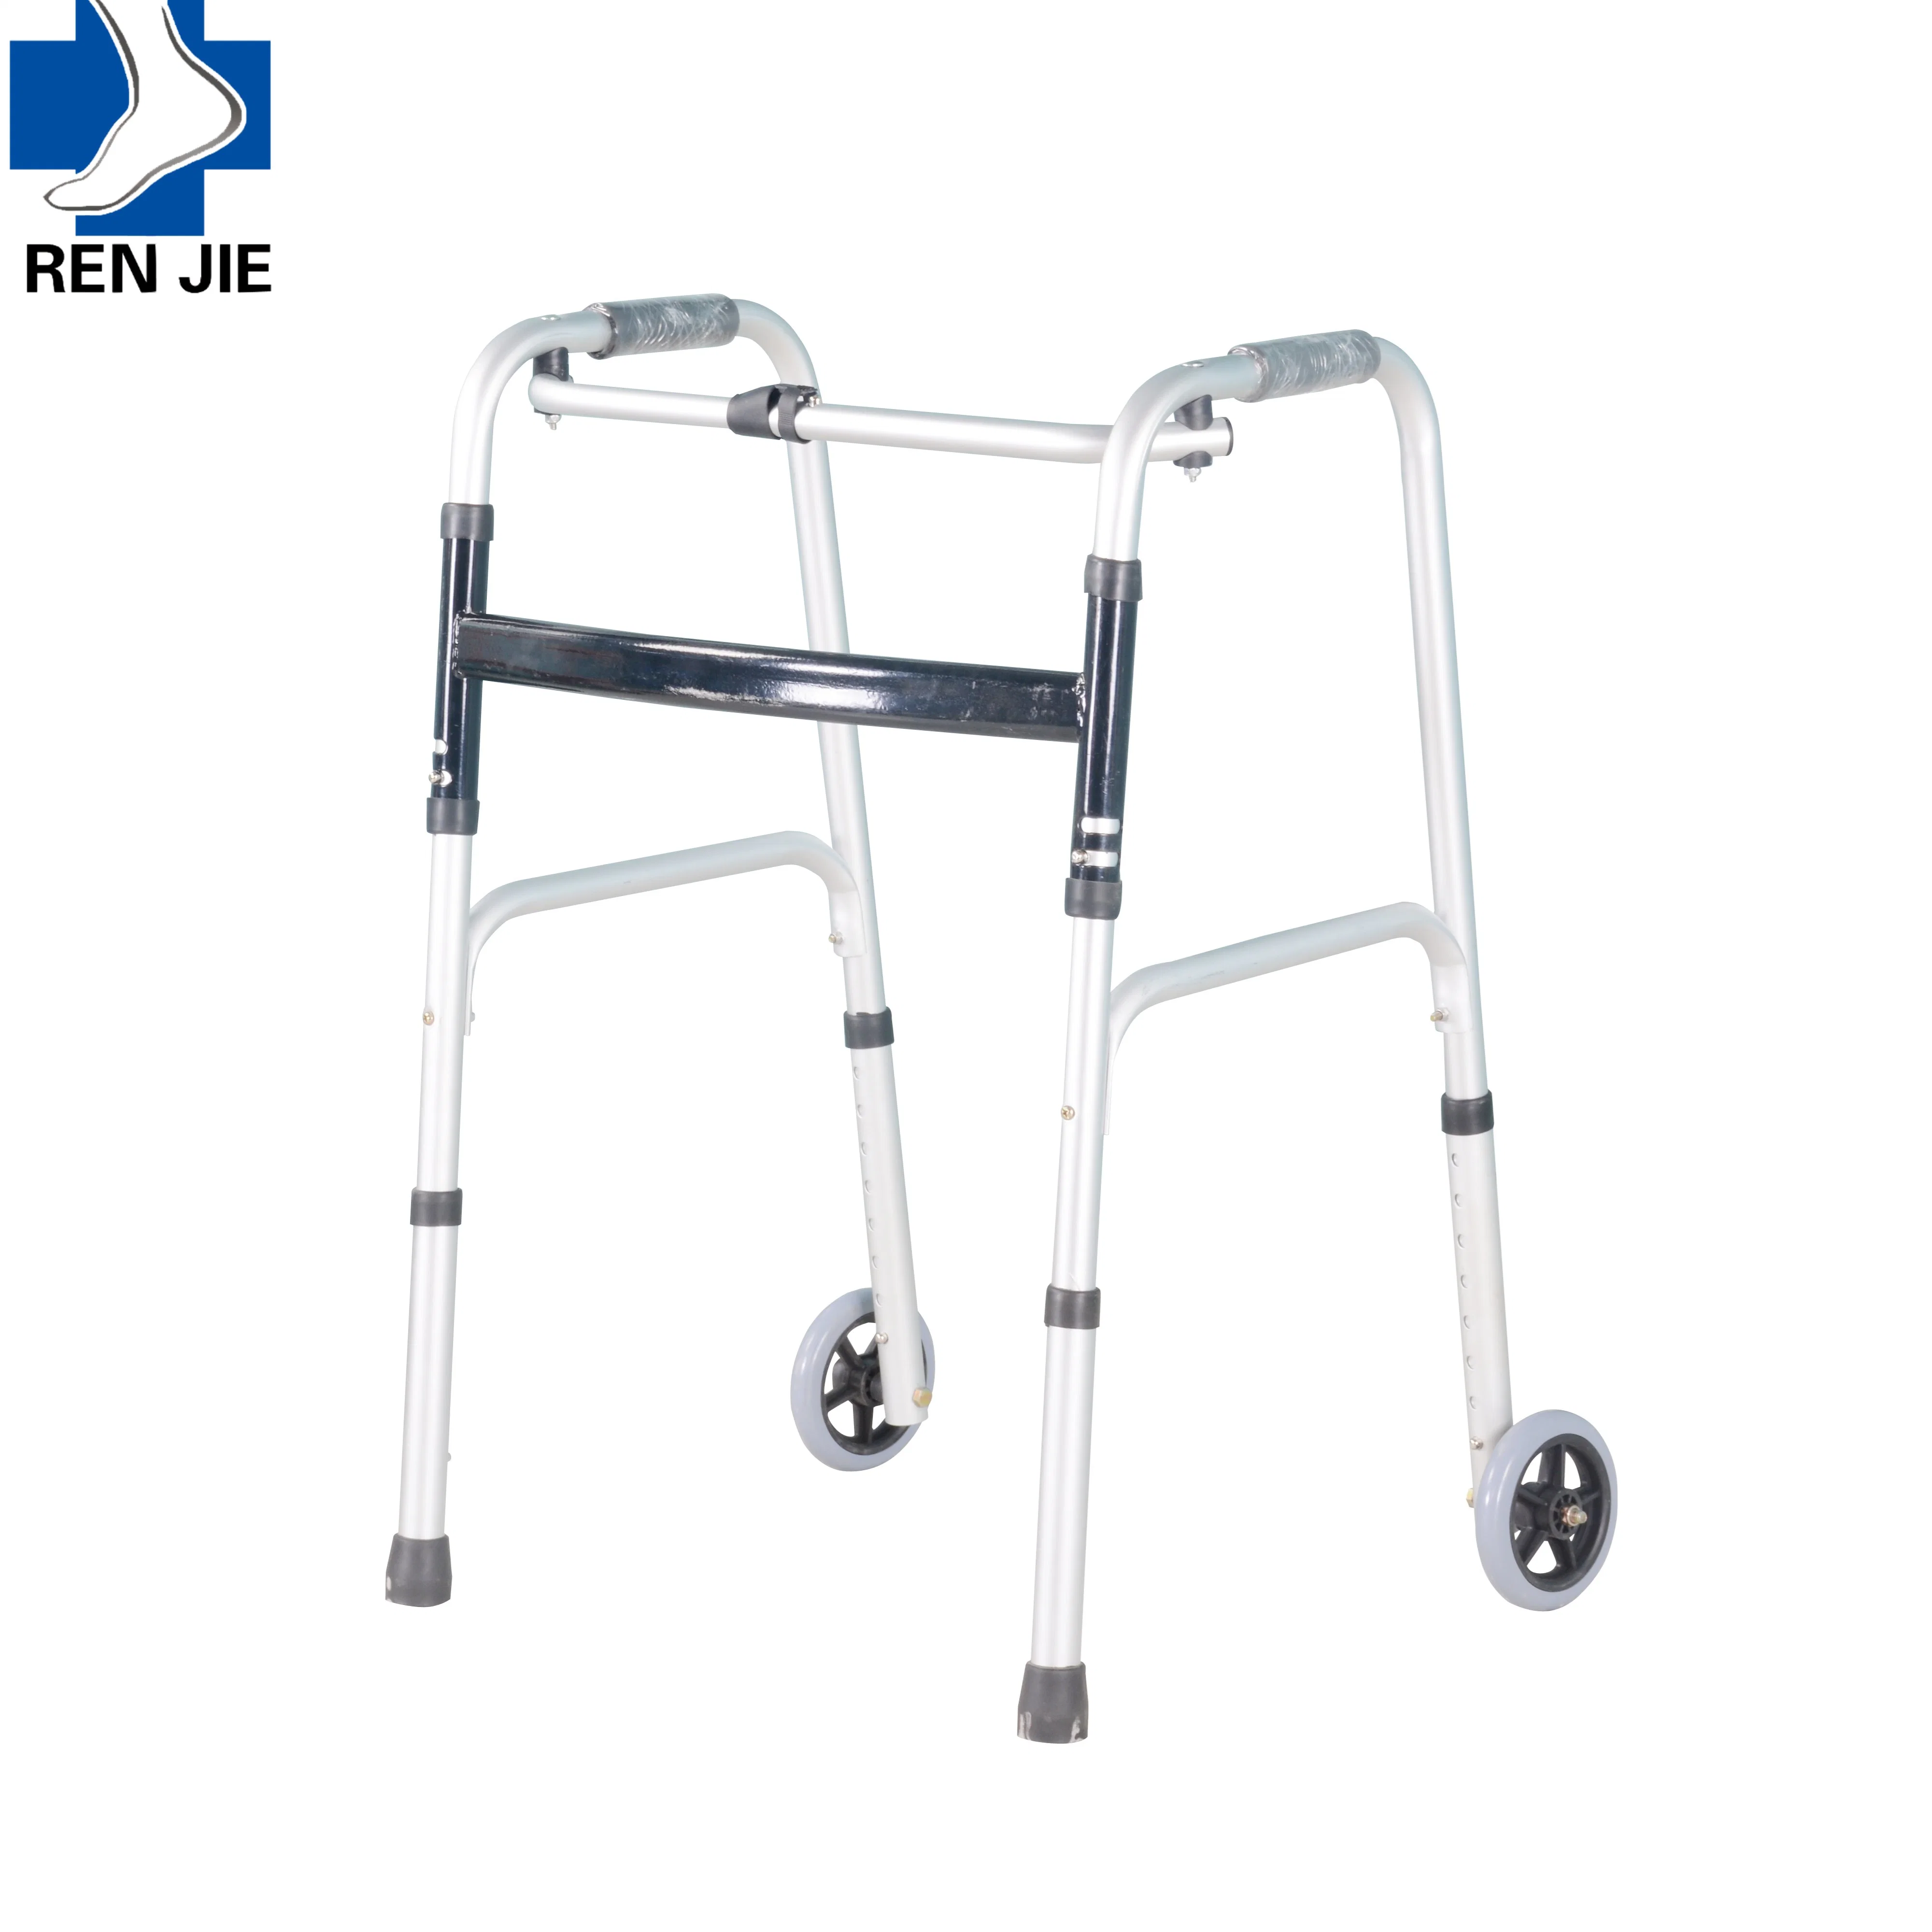 High Quality Handicapped Adult Walkers Portable Adjustable-Height for Elderly People Disabled People Medical Walker